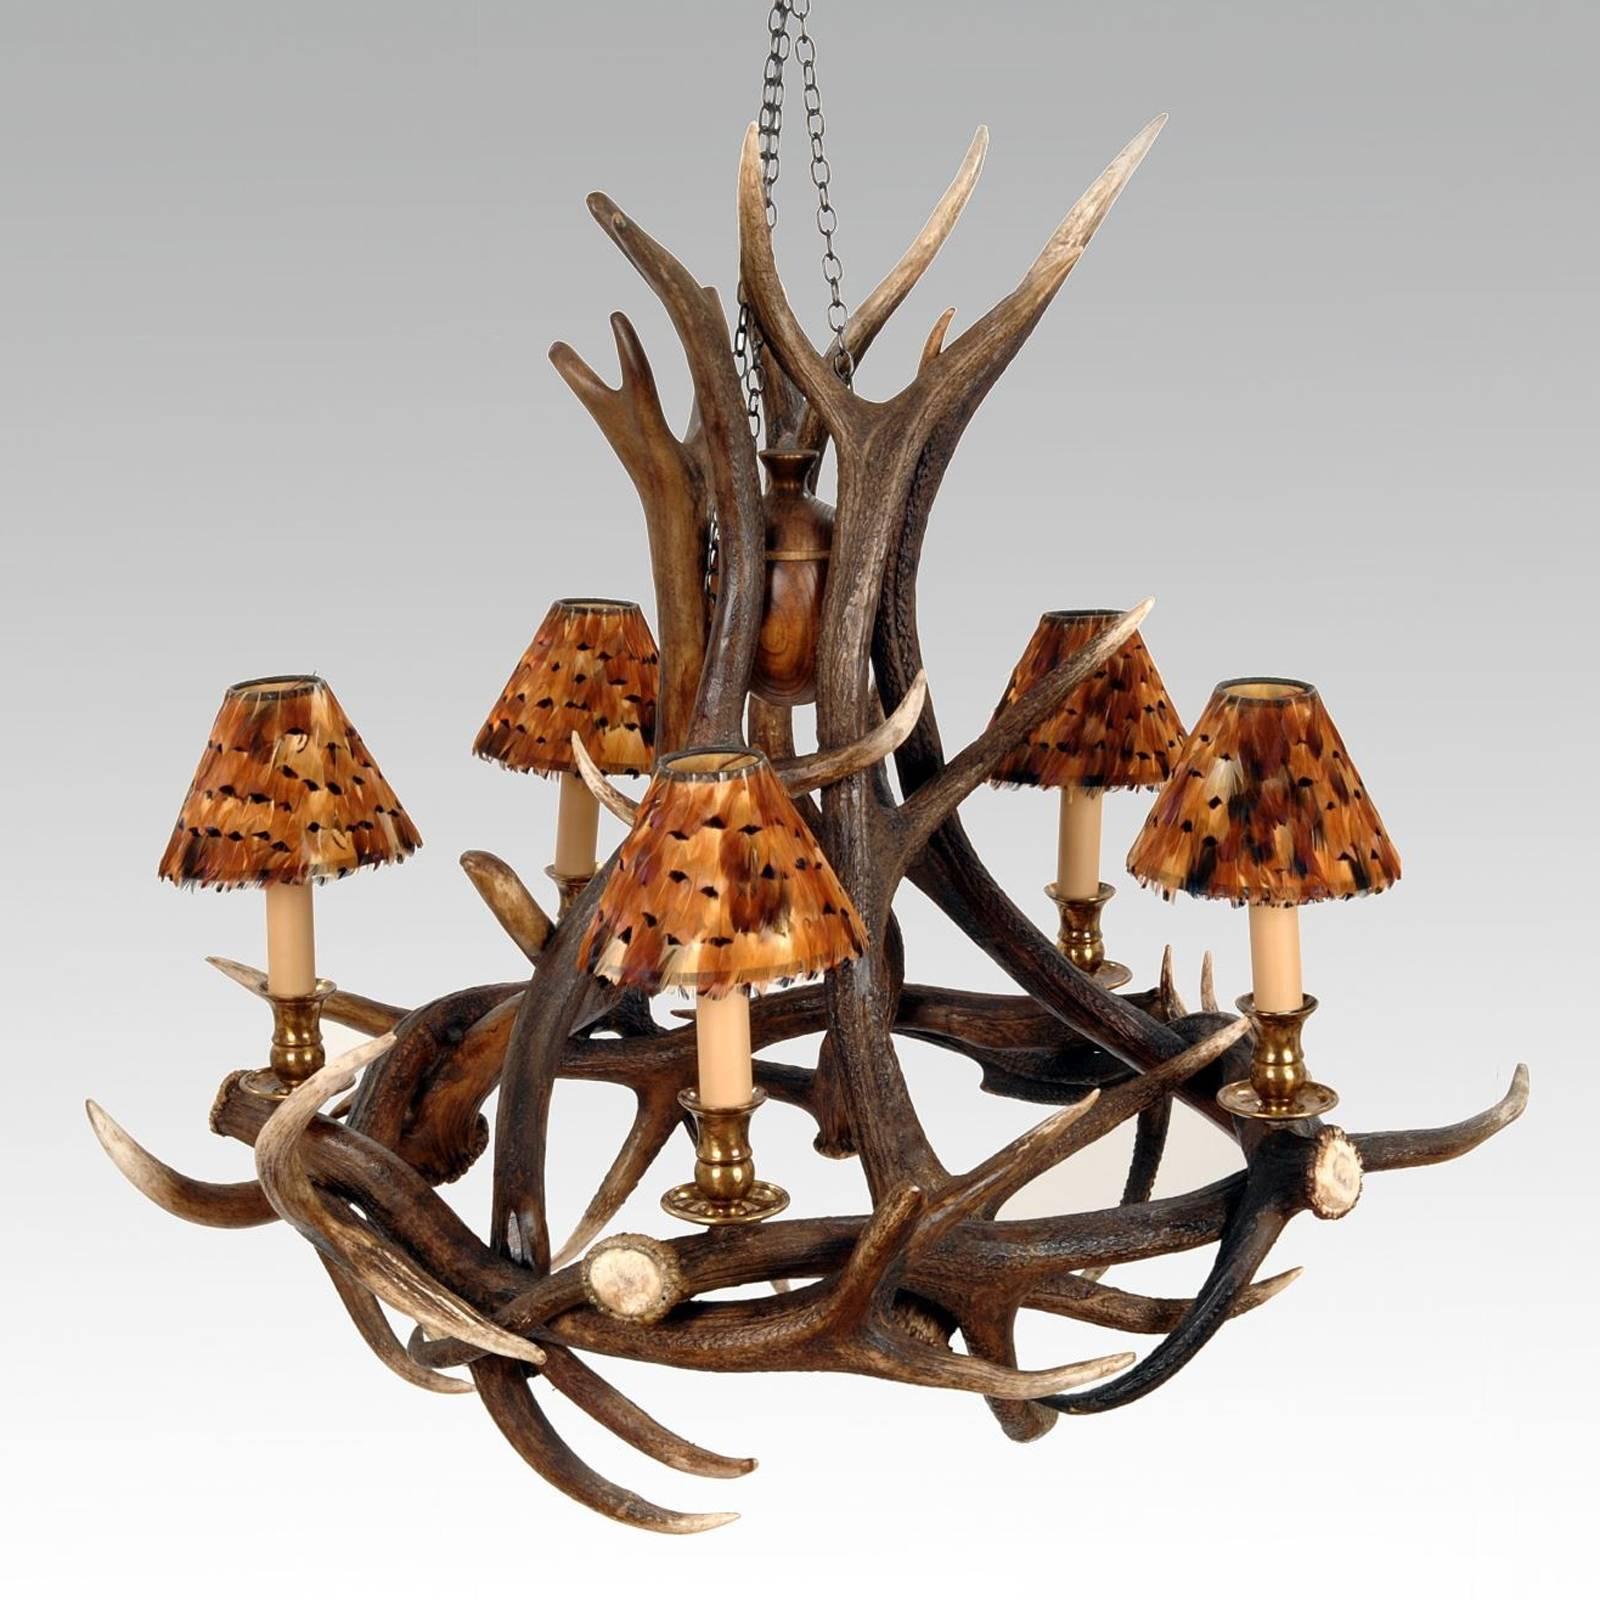 Chandelier five deer with five deer antlers, with vintage
brass finish, five bulbs and five partridge feather lampshade.
